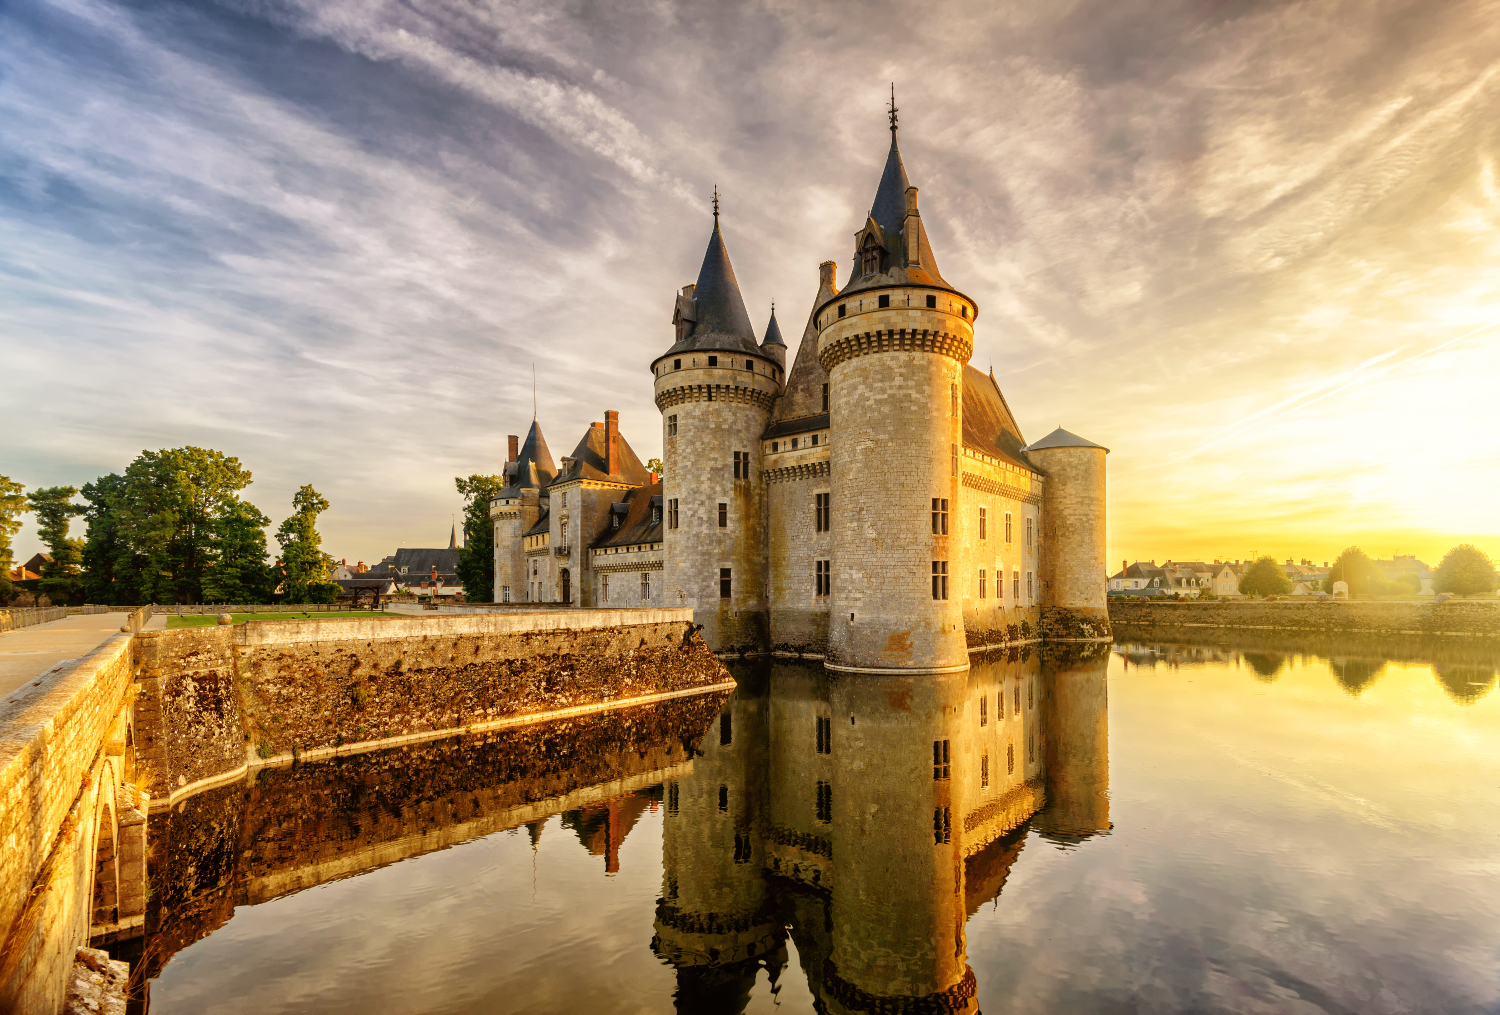 The chateau of Sully-sur-Loire at sunset, #France, #travel #best #photos and #places #Loire